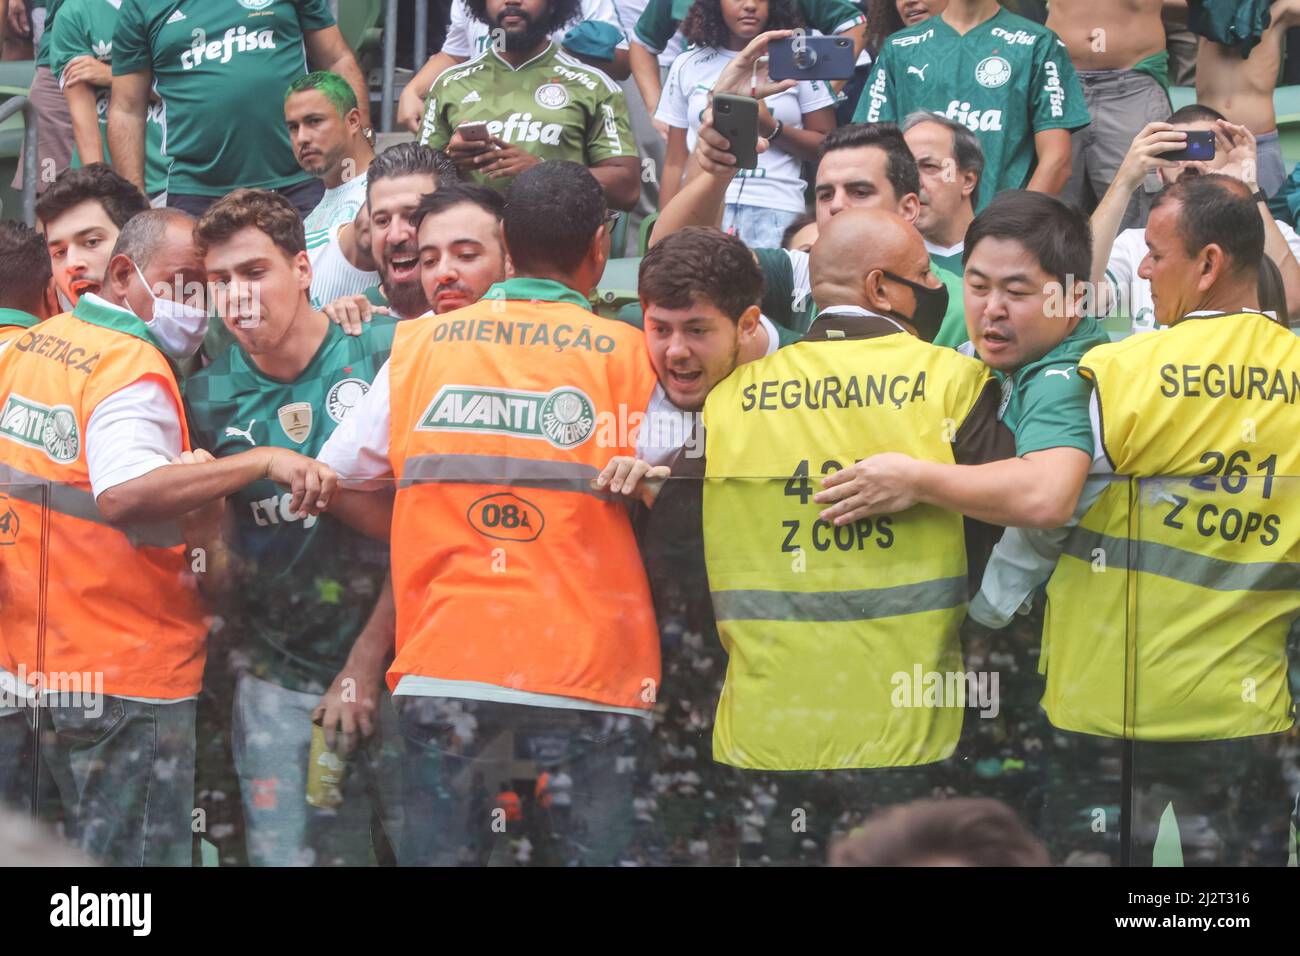 SP - Sao Paulo - 04/03/2022 - PAULISTA 2022 FINAL, PALMEIRAS X SAO PAULO -  Palmeiras players celebrate the title of champion during the award ceremony  after winning against Sao Paulo in